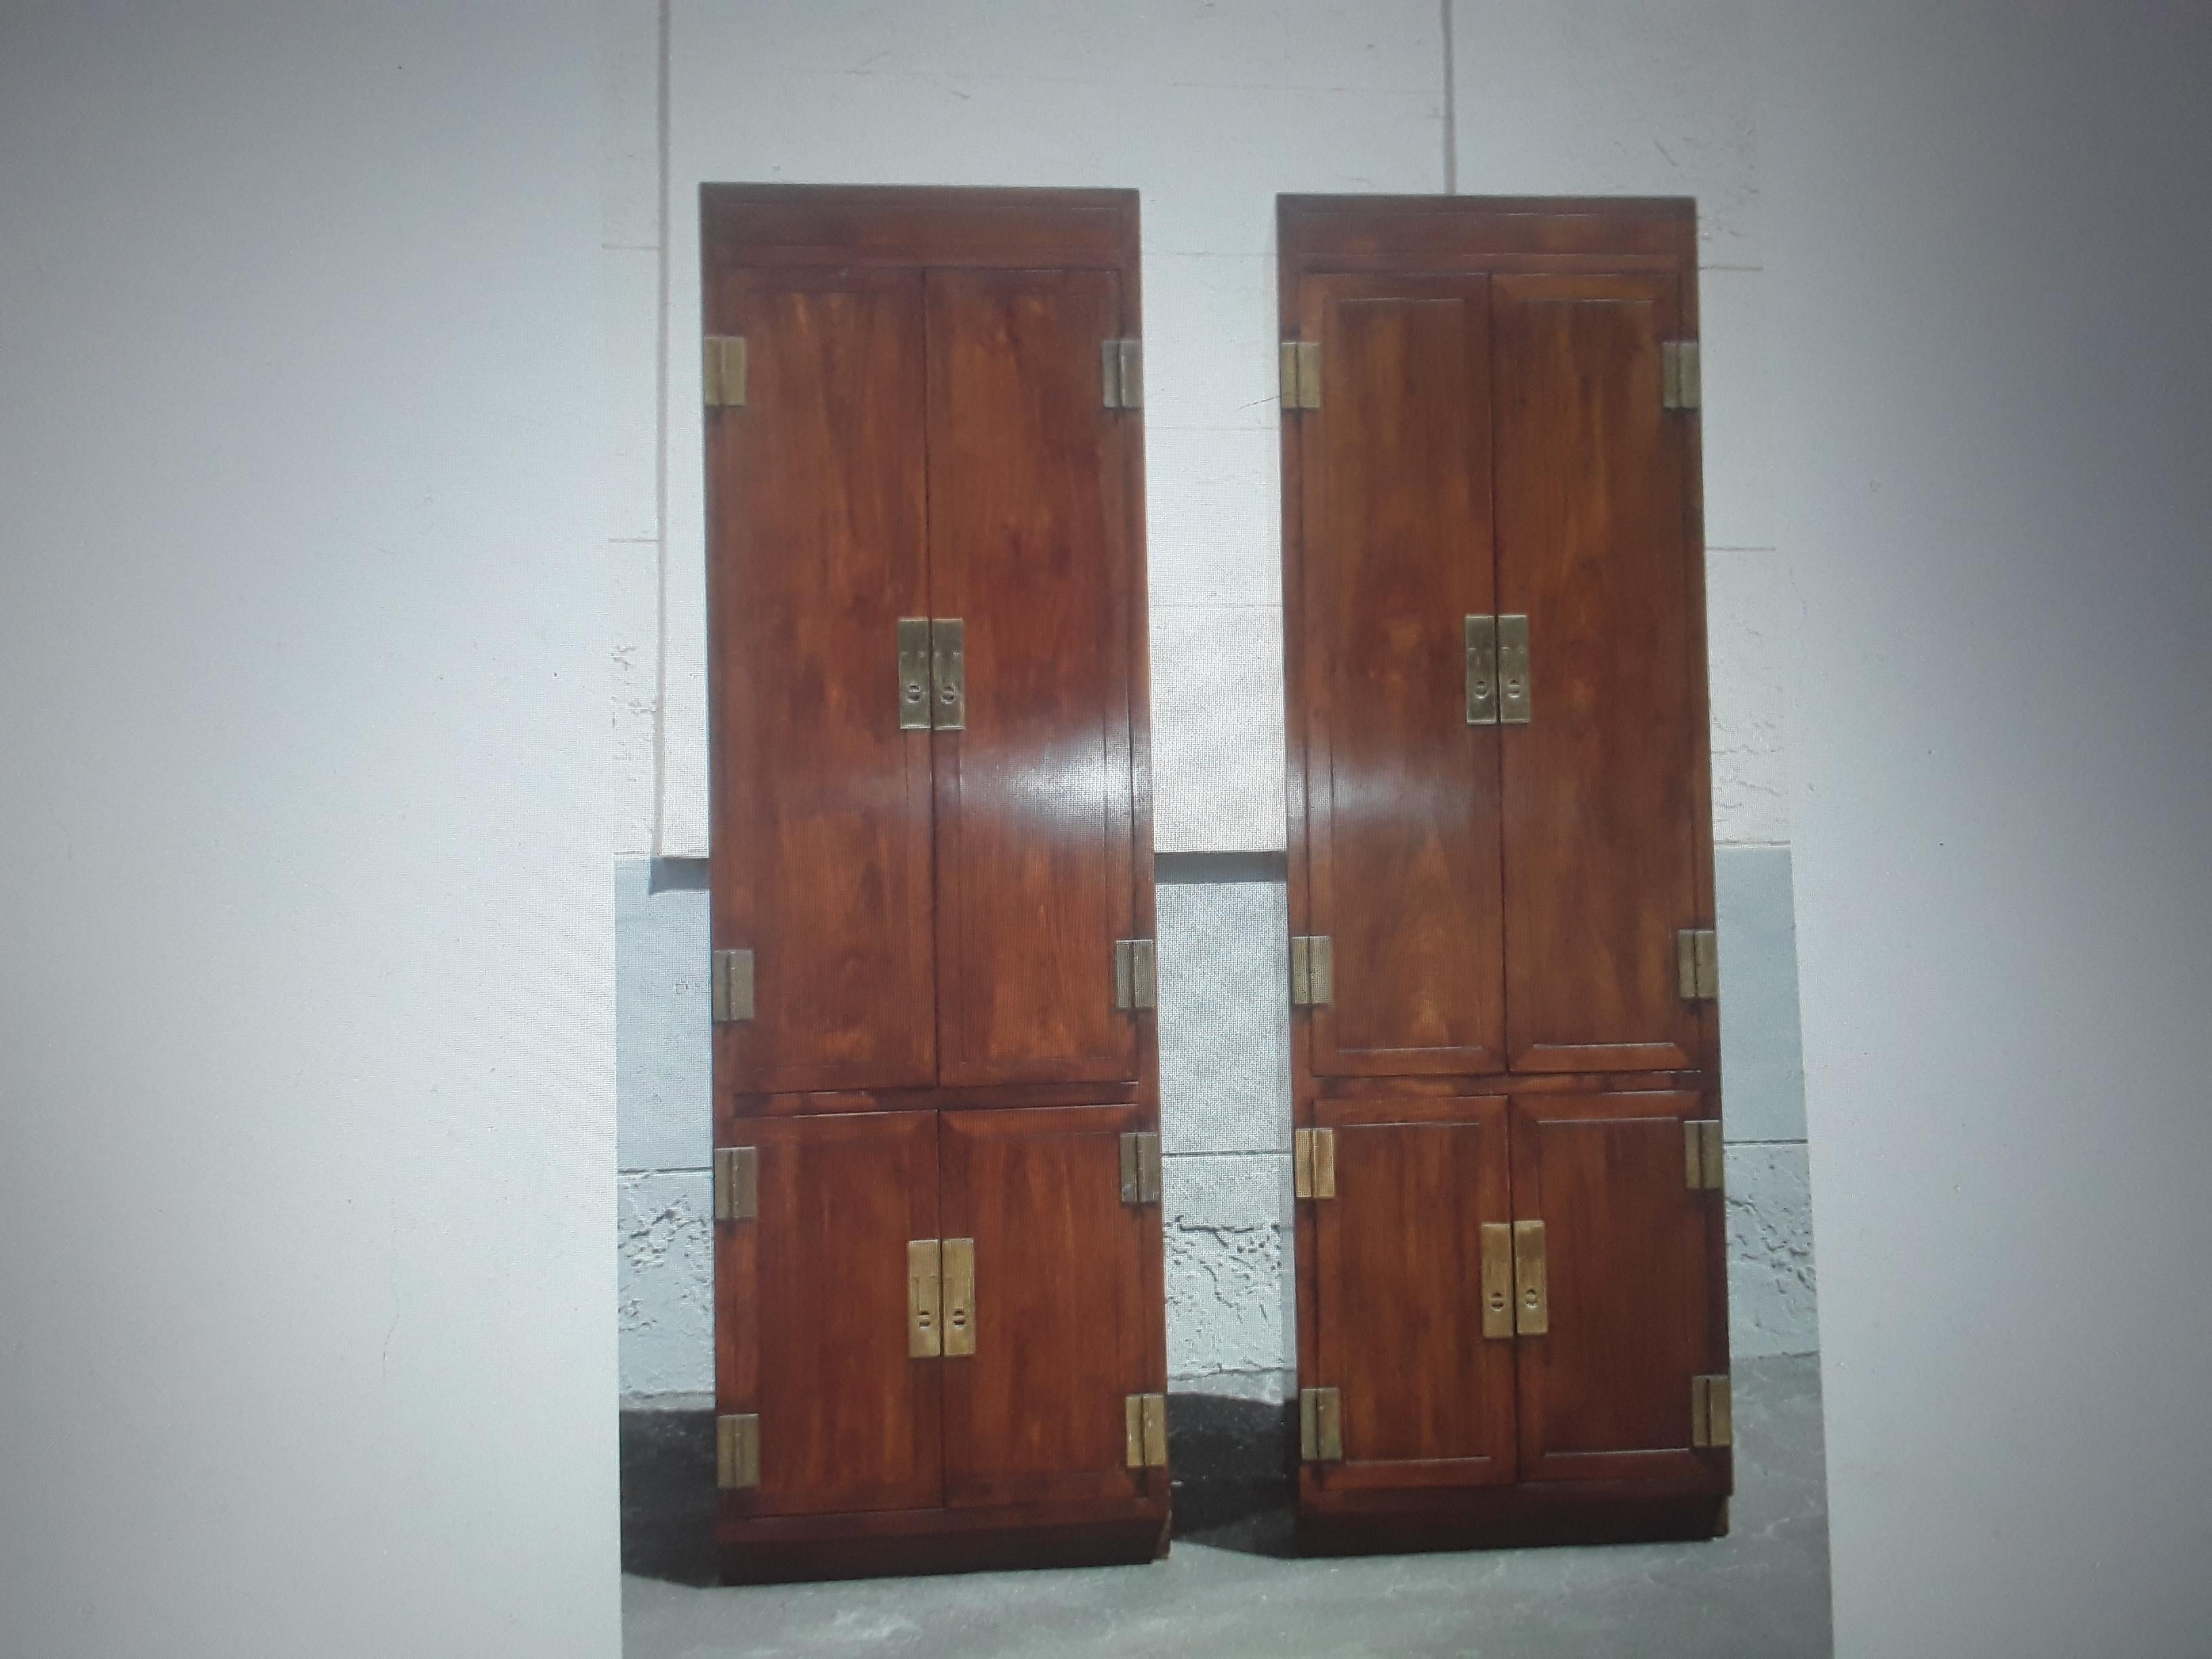 Rare Pair of Vintage 1960's Tall and Slim Campaign style Wardrobes/ Armoires/ Cabinets. The hardware is stunning. These would work anywhere but tight spaces? perfect!